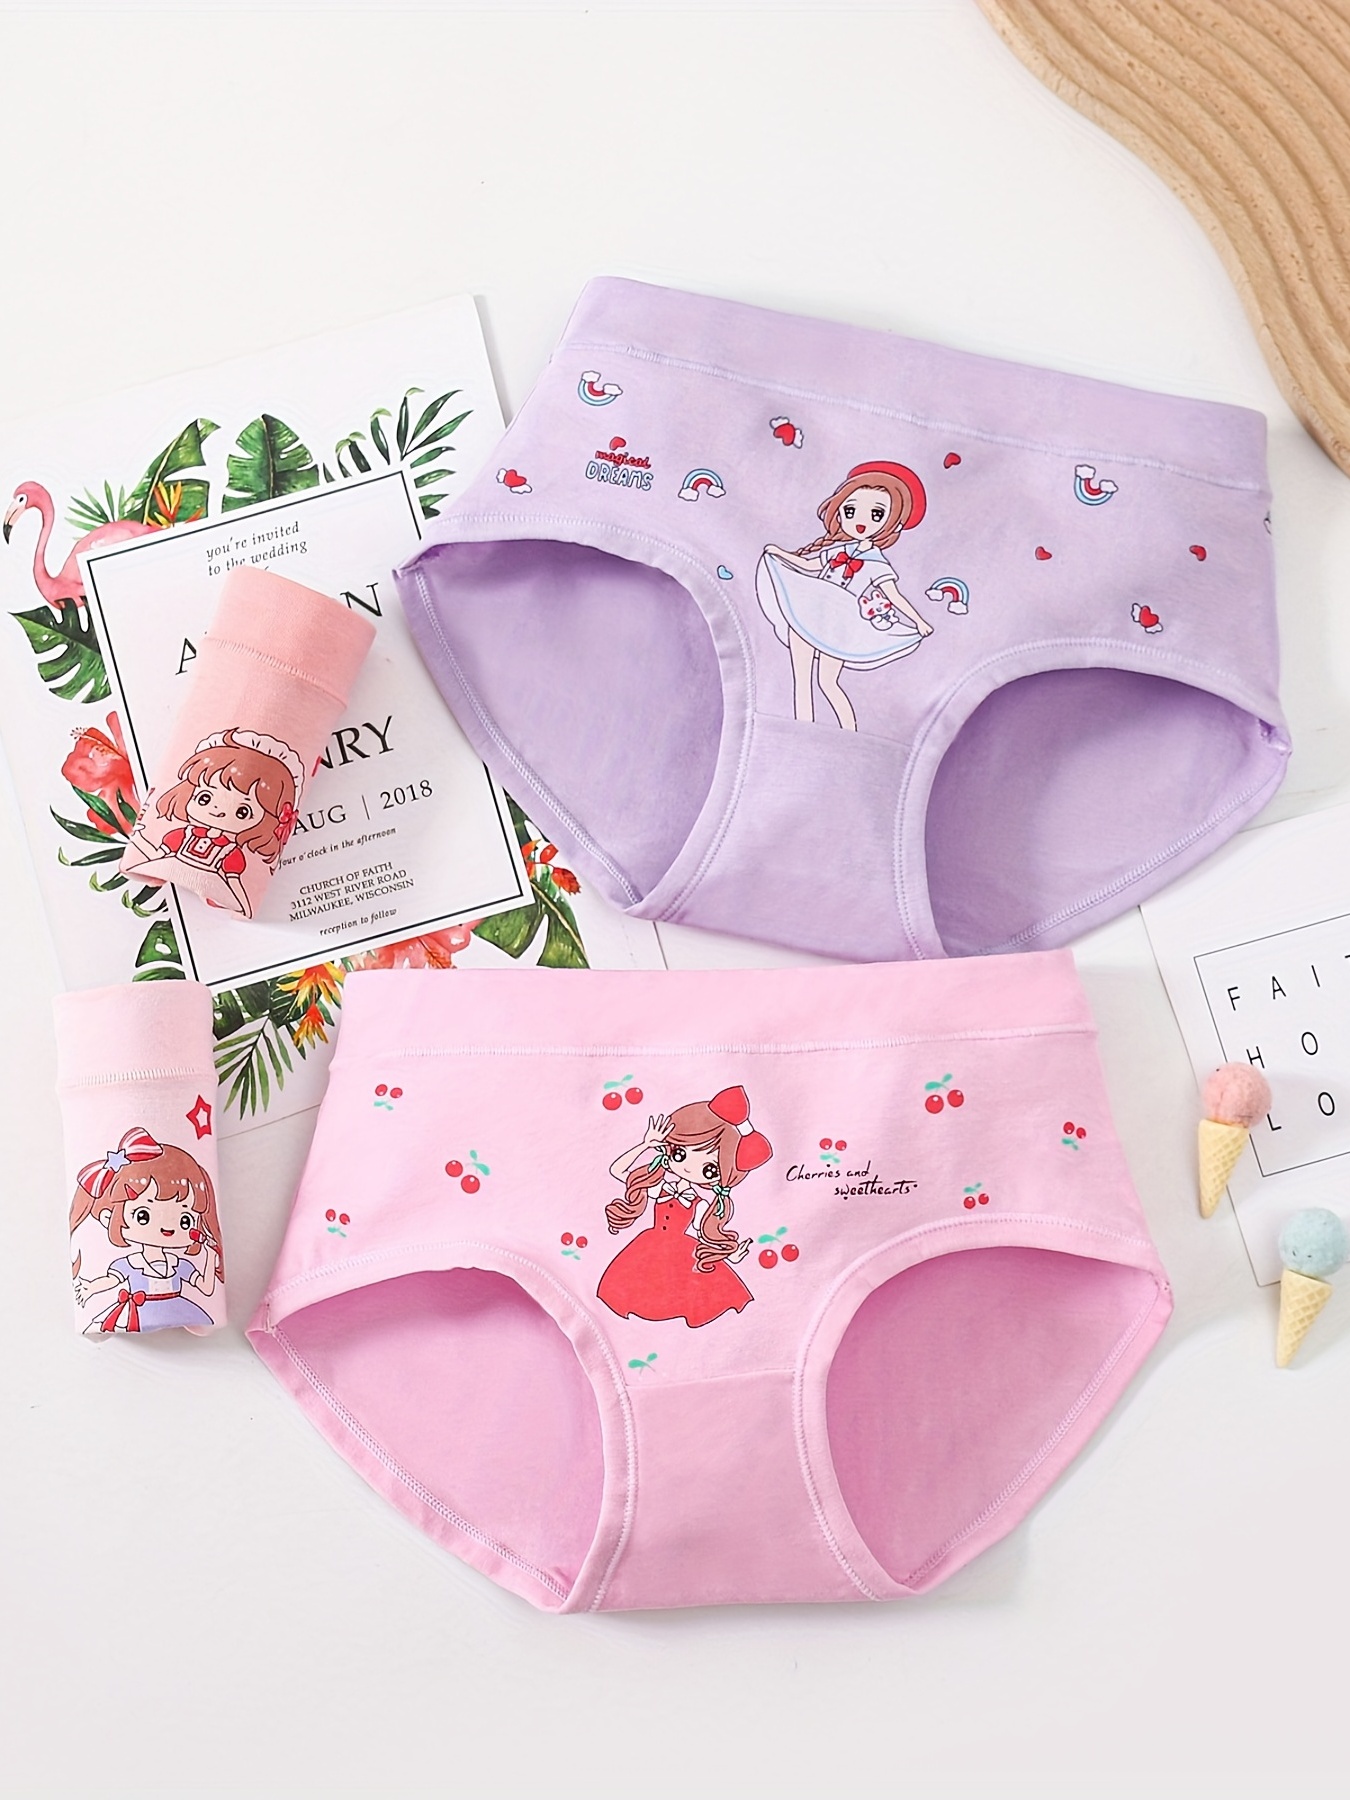 Girls Cotton Knickers (4 Pack)